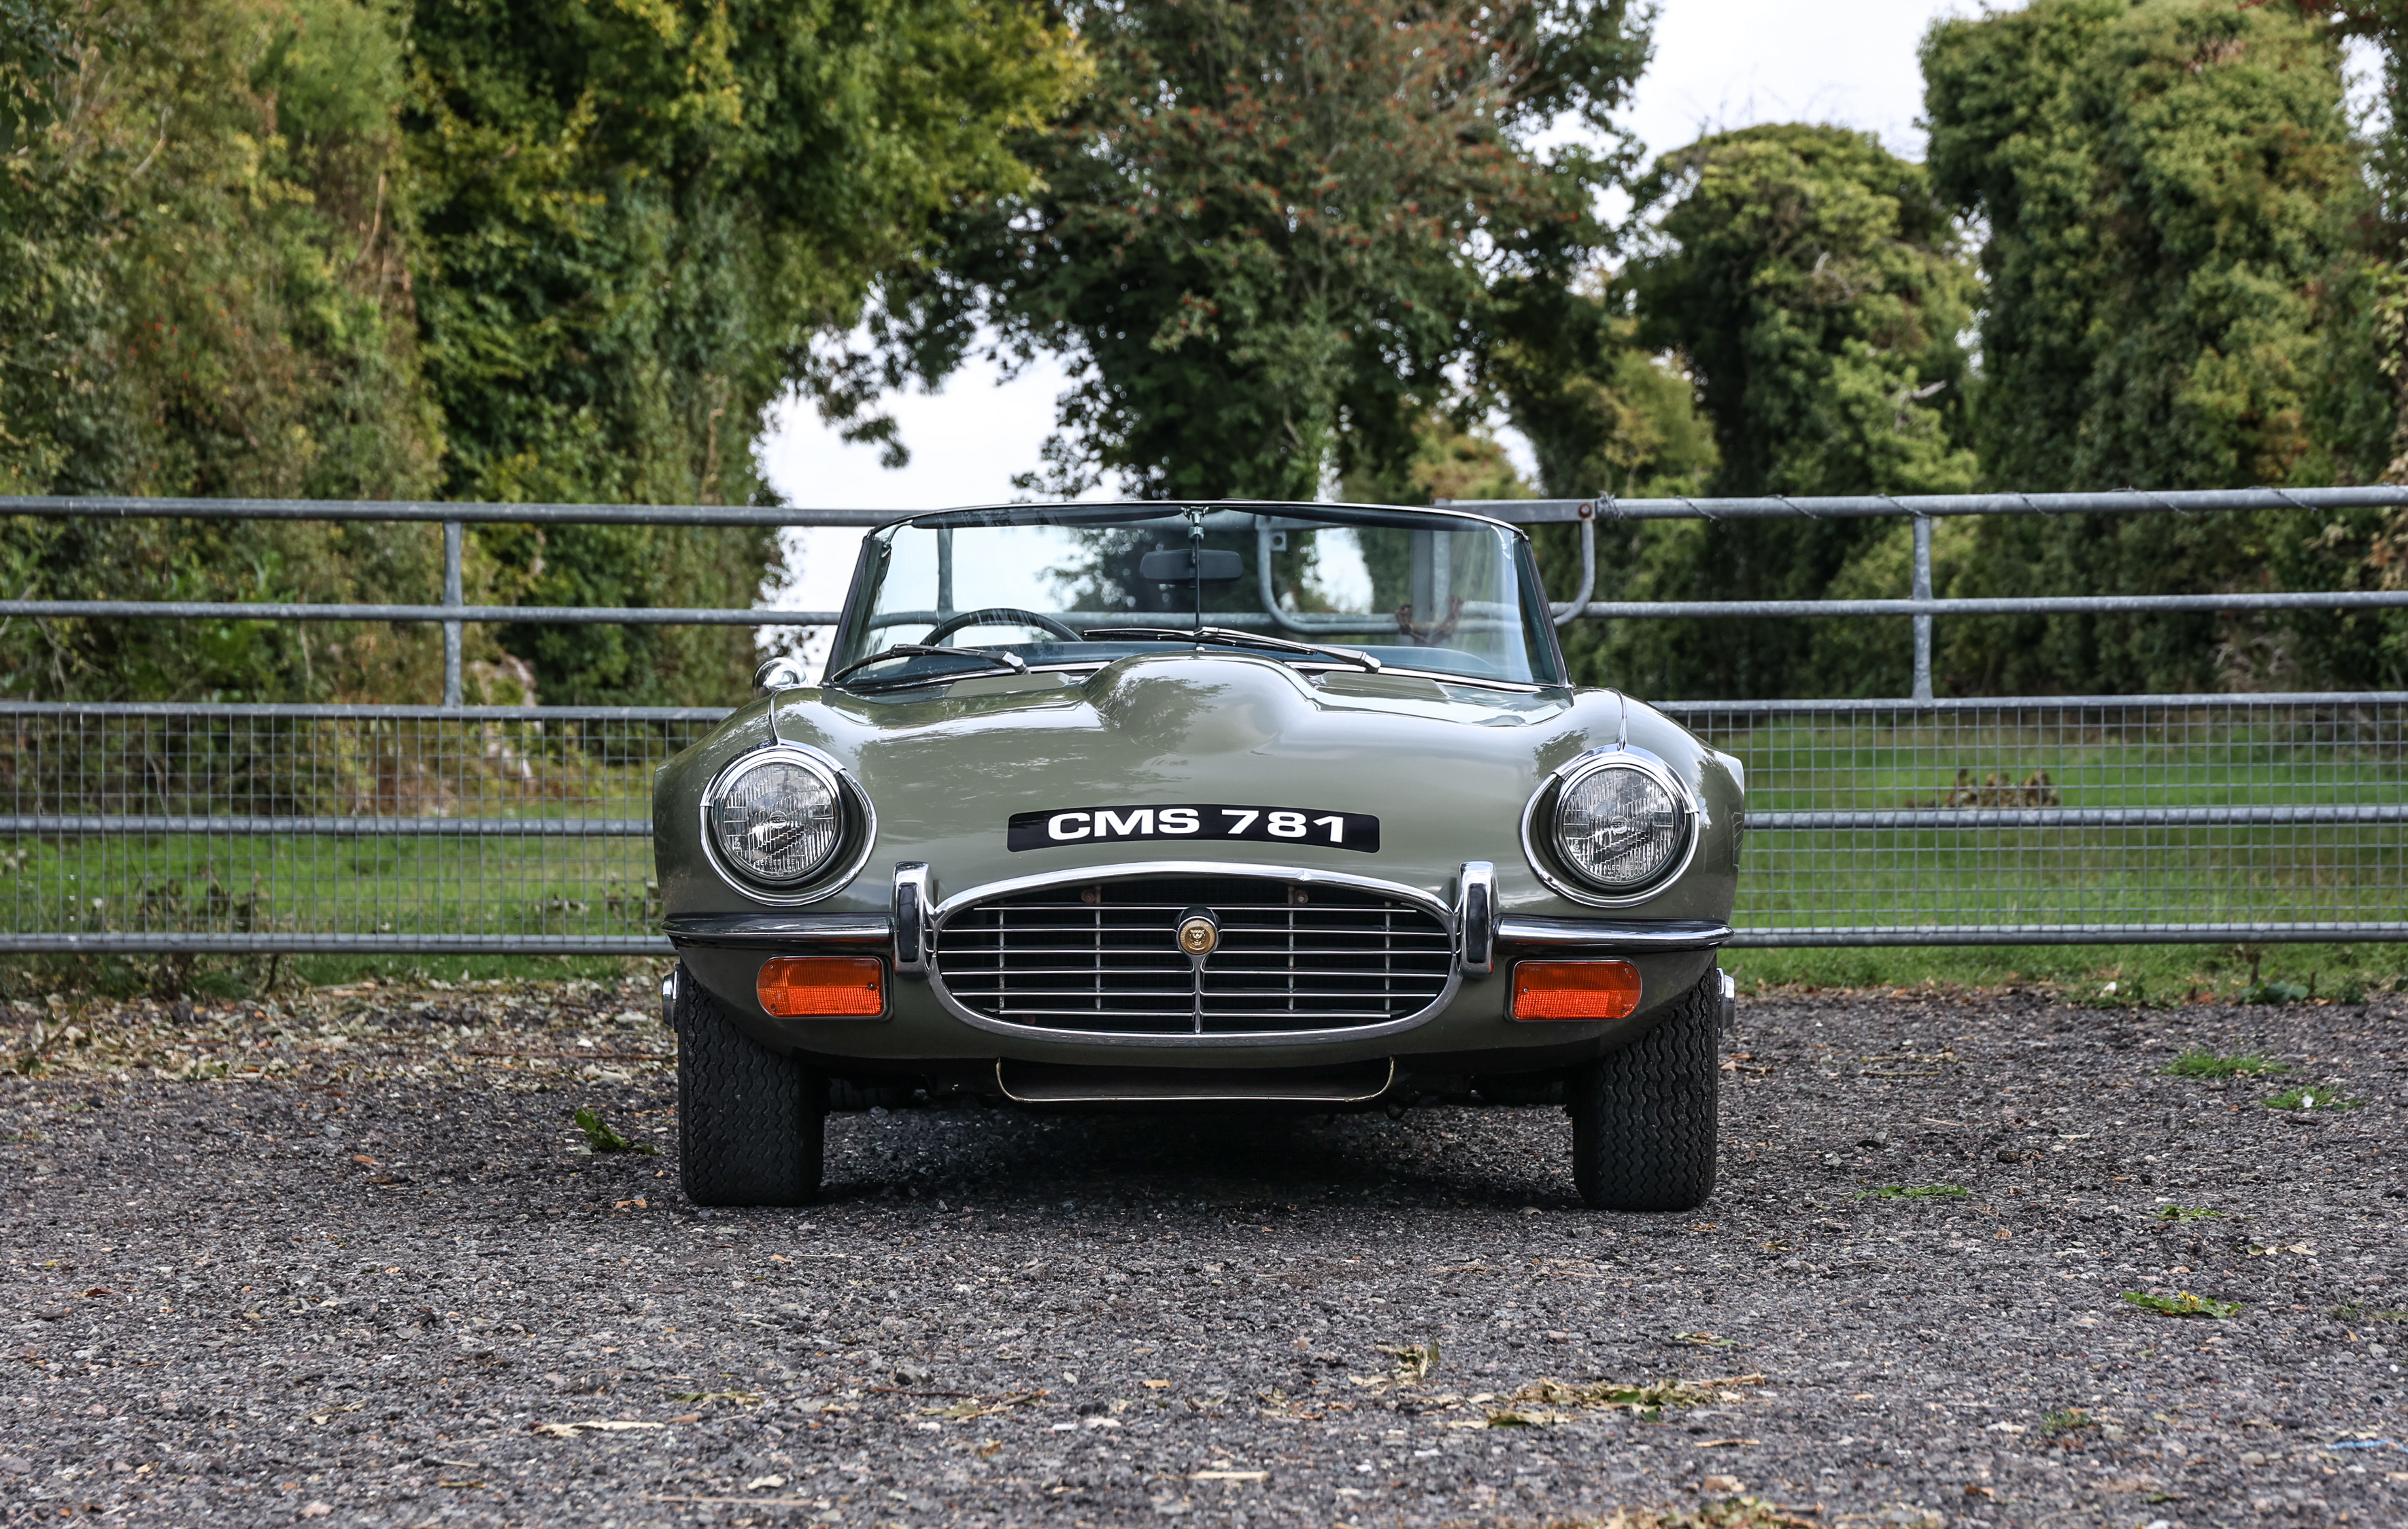 1973 JAGUAR E-TYPE SERIES III ROADSTER Registration Number: CMS 781 Chassis Number: 1S1868 - Image 11 of 22